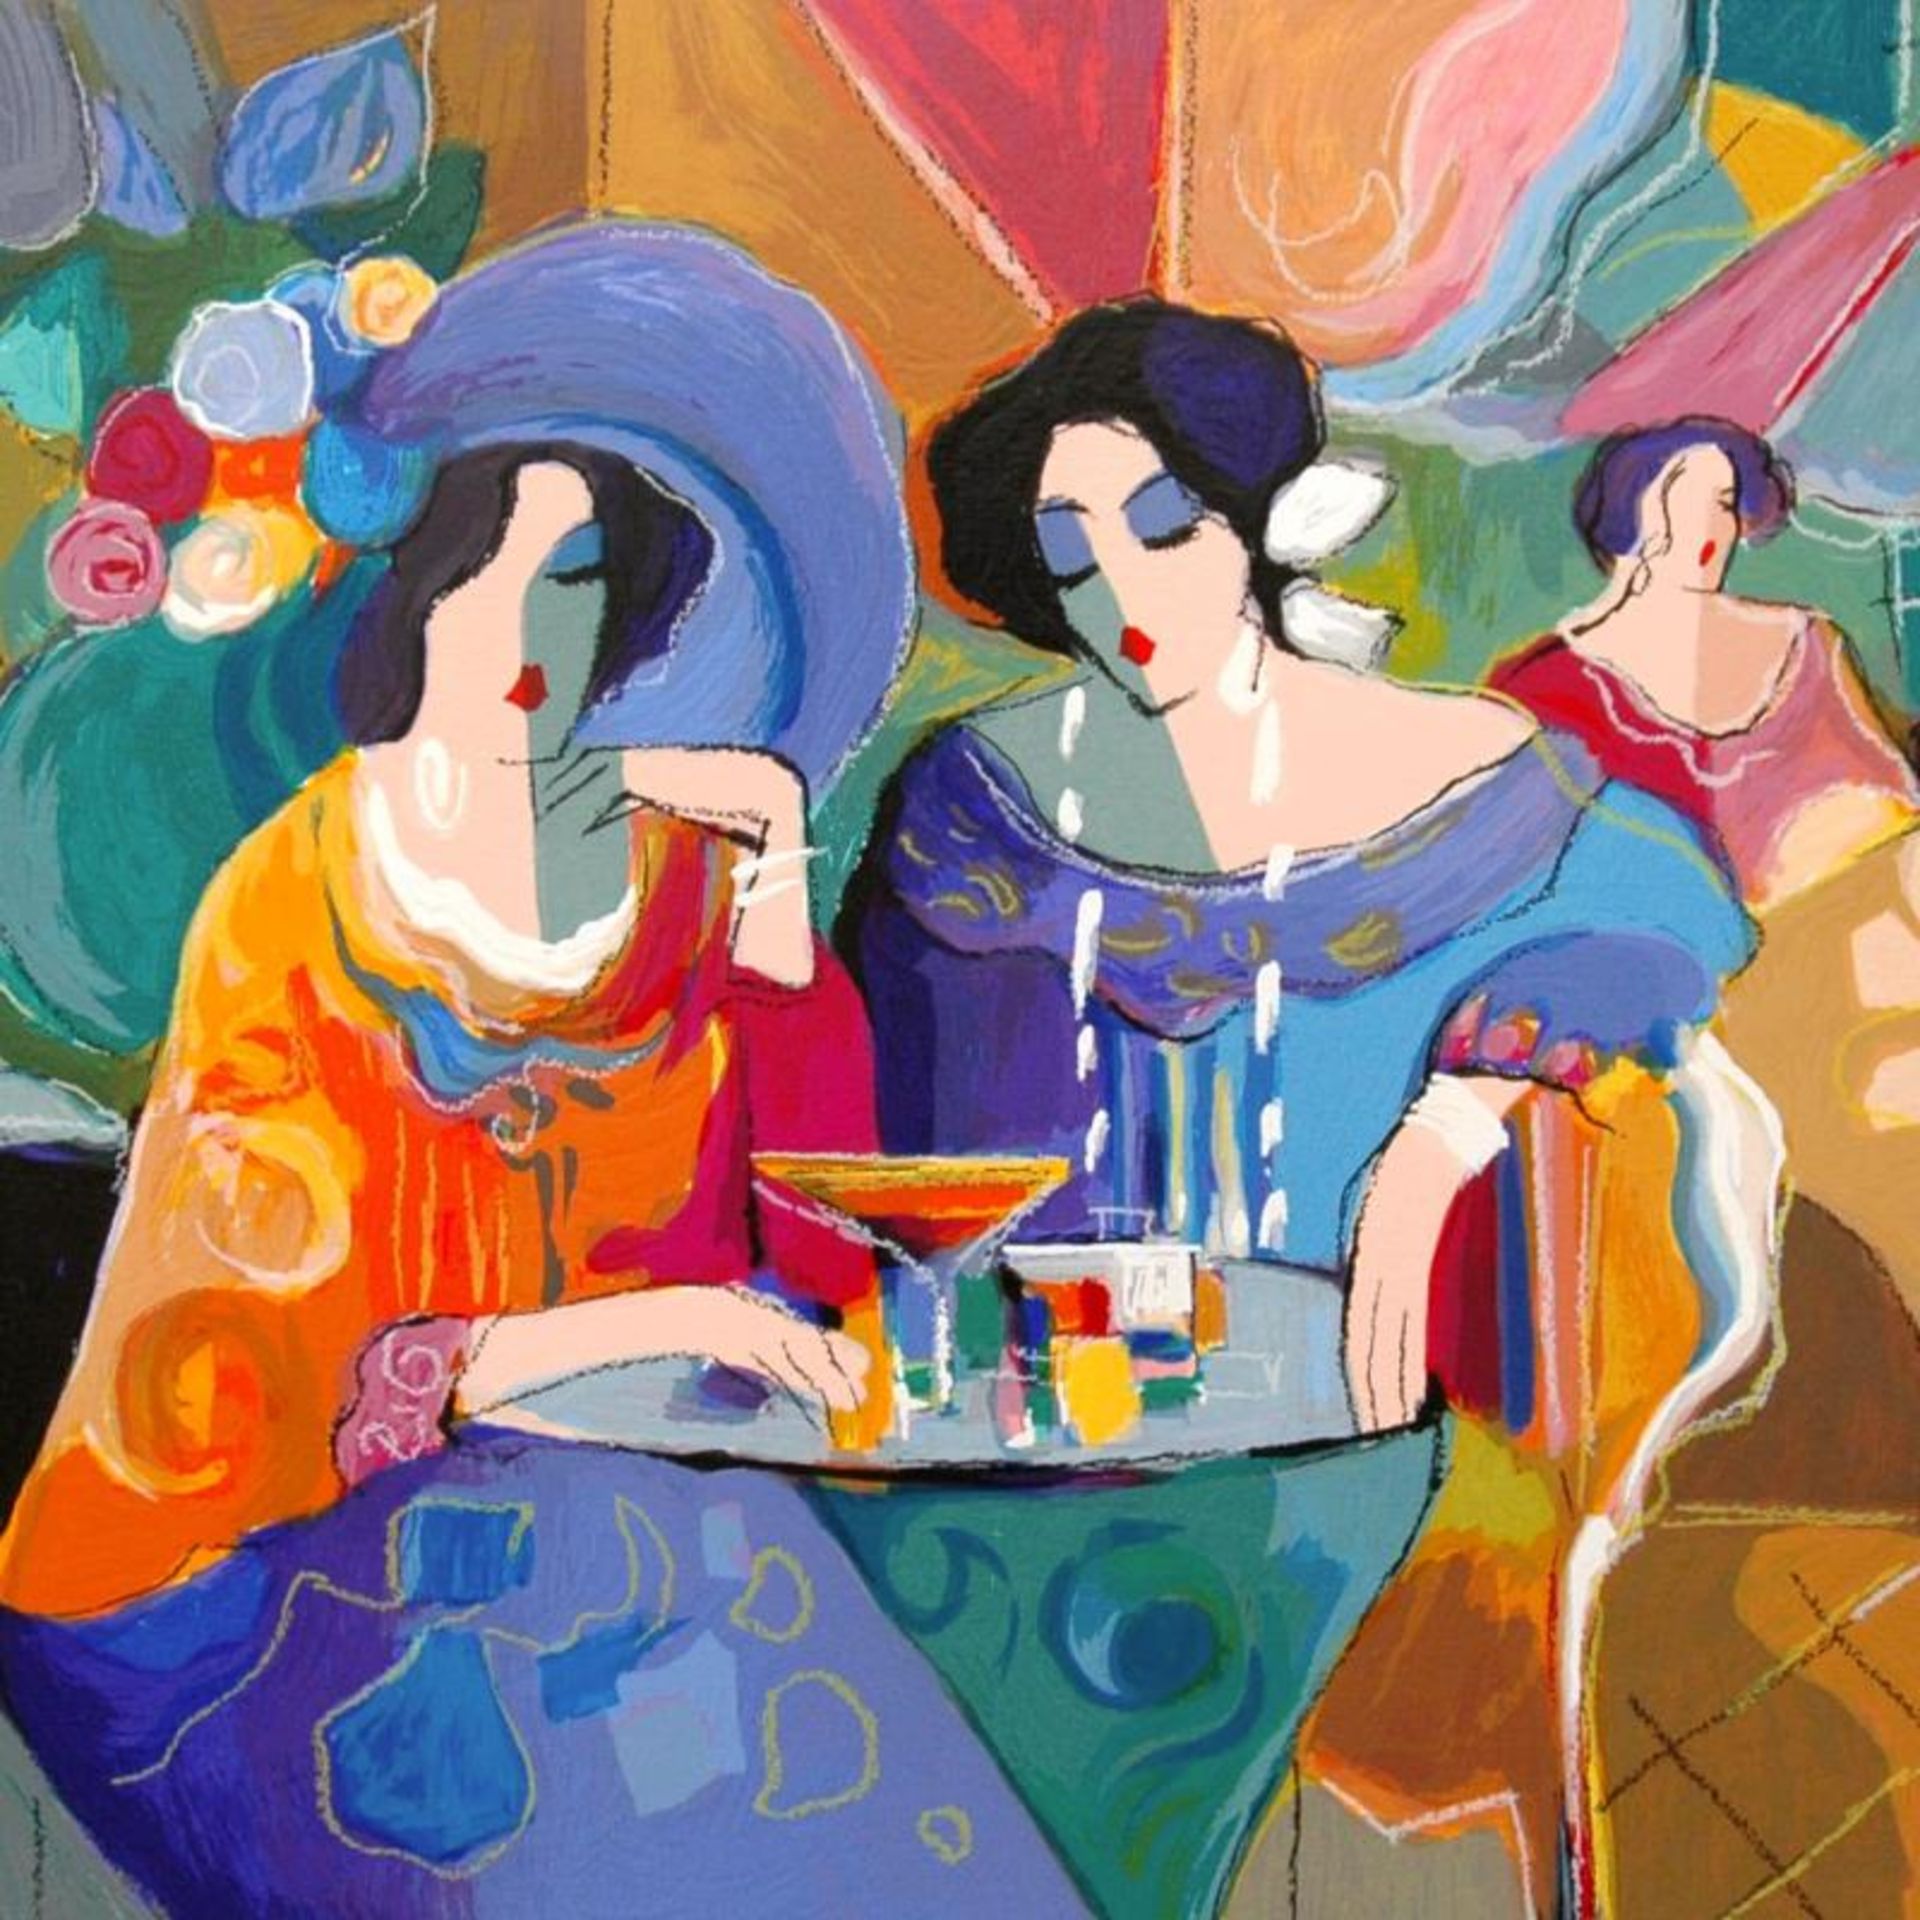 Cafe Array by Maimon, Isaac - Image 2 of 2